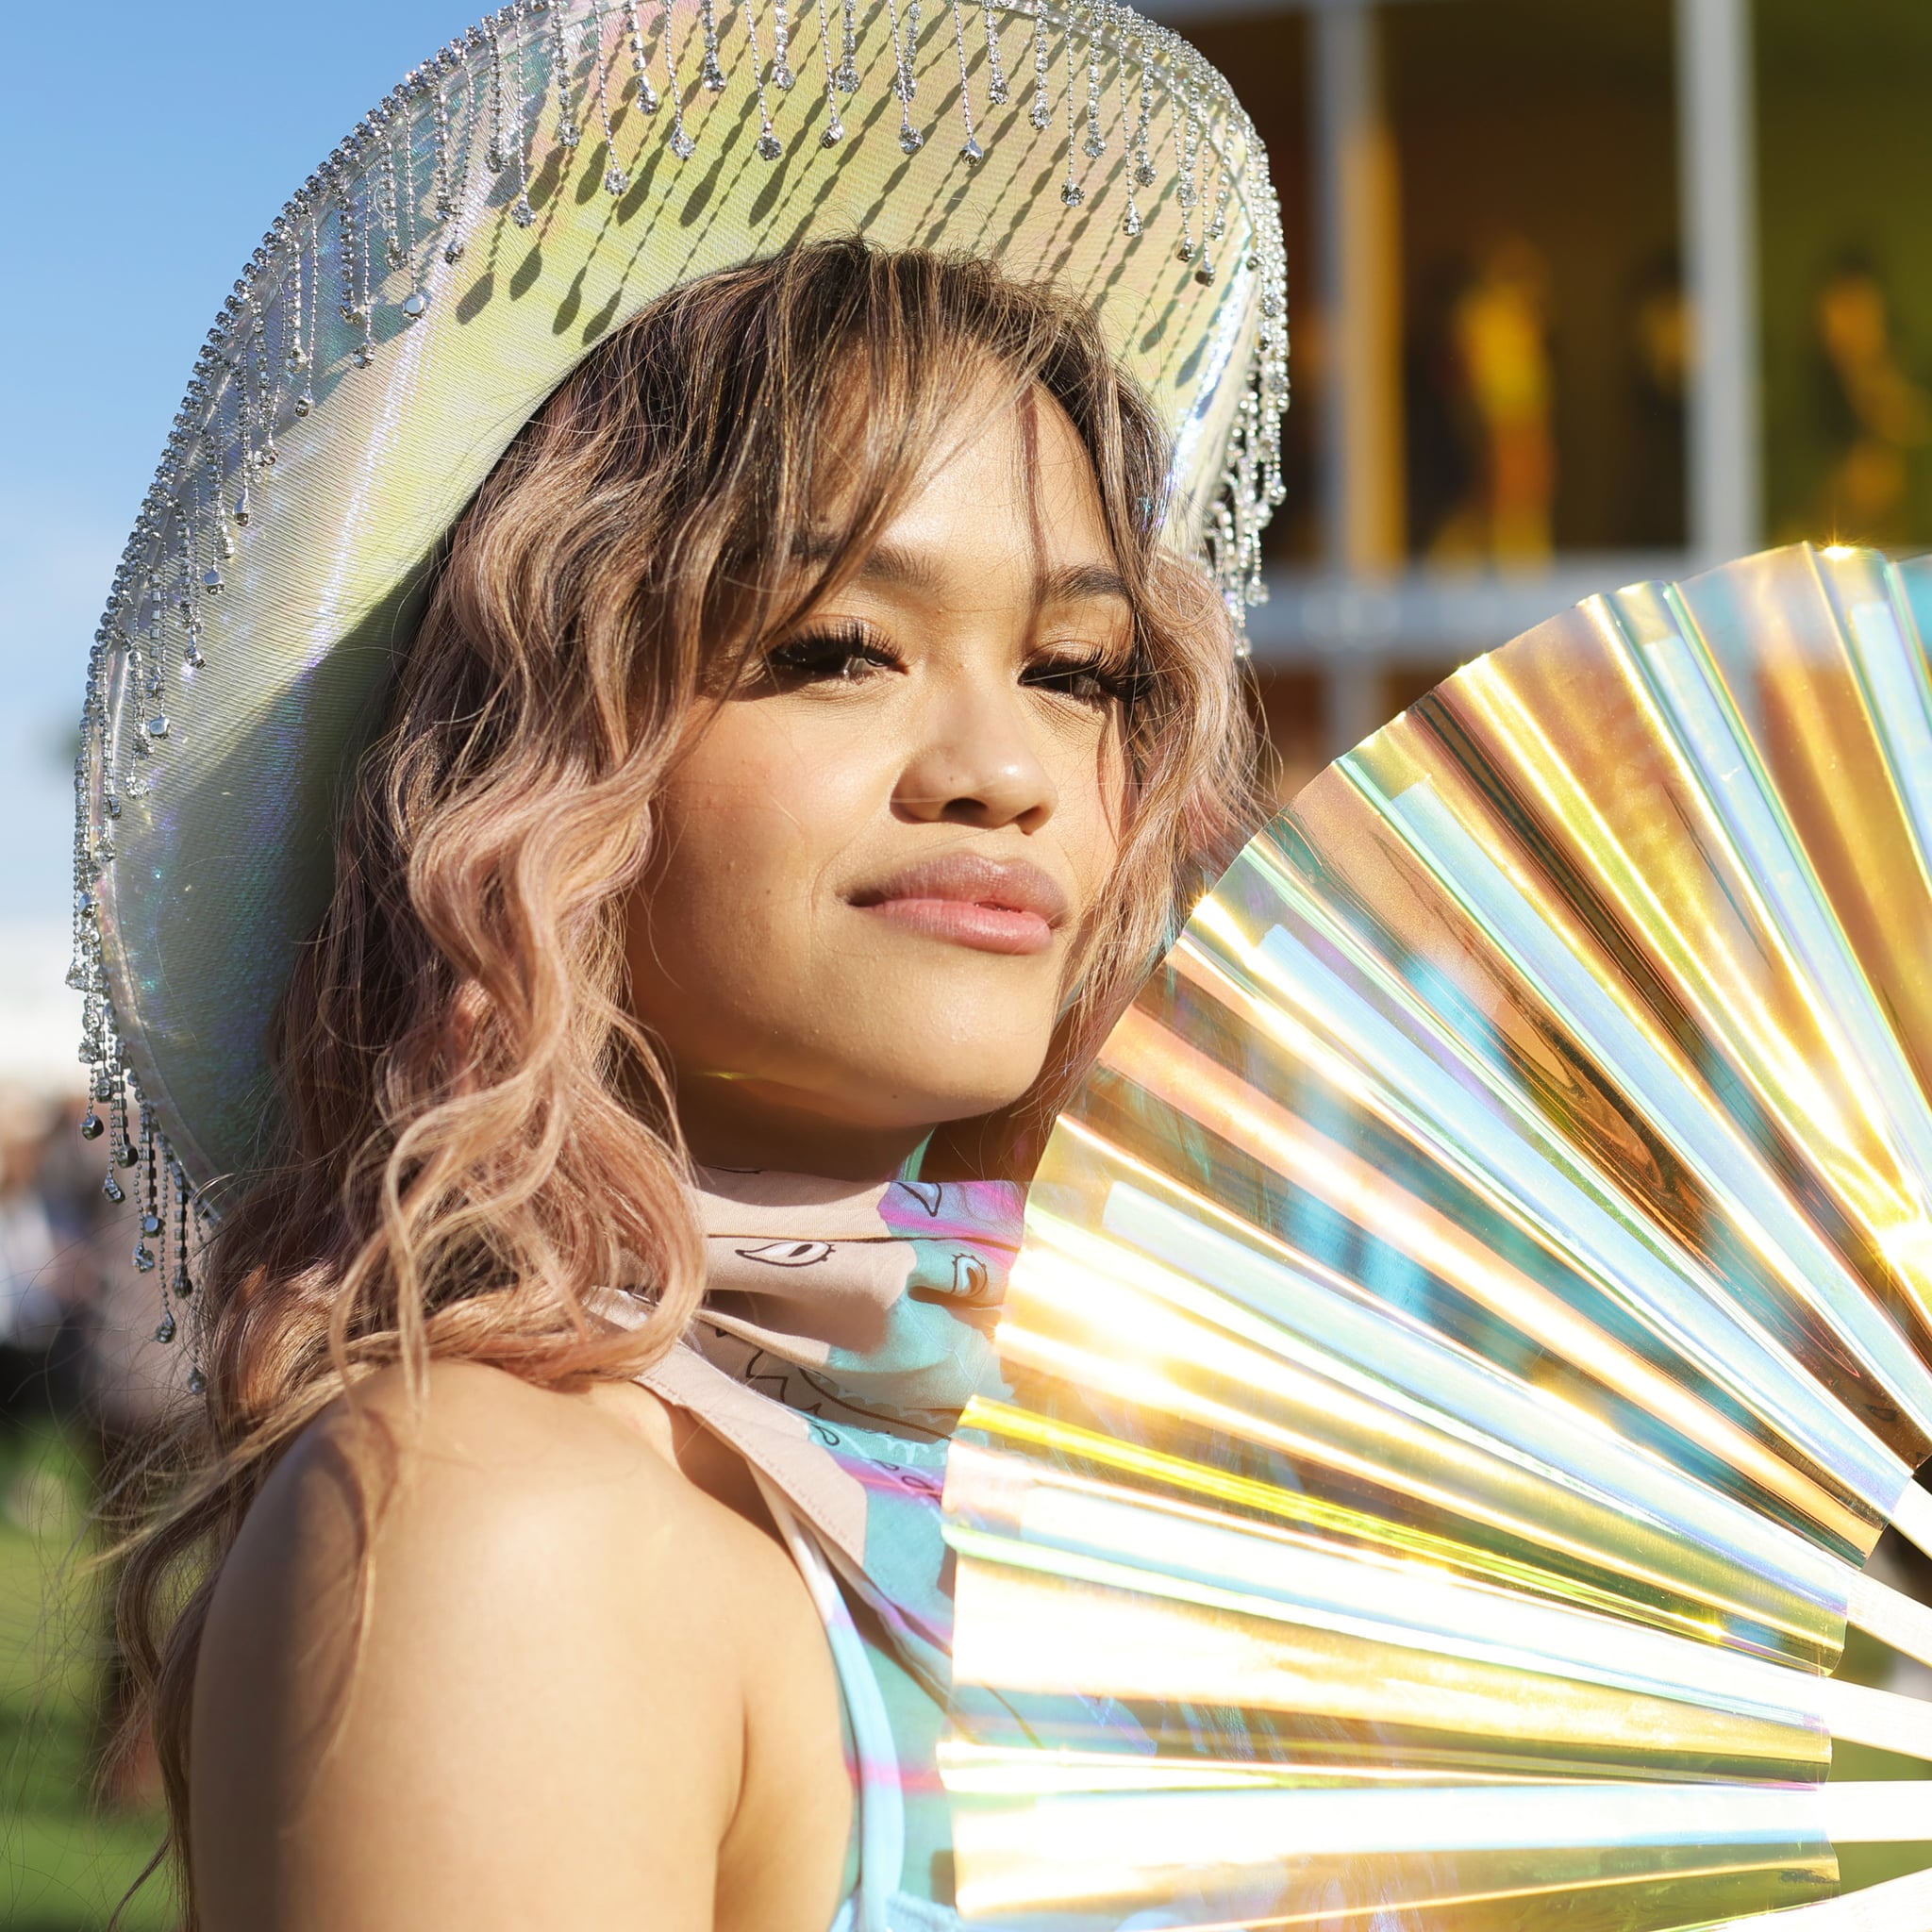 Get Ready to Rock: Lollapalooza Festival Outfits That Will Turn Heads